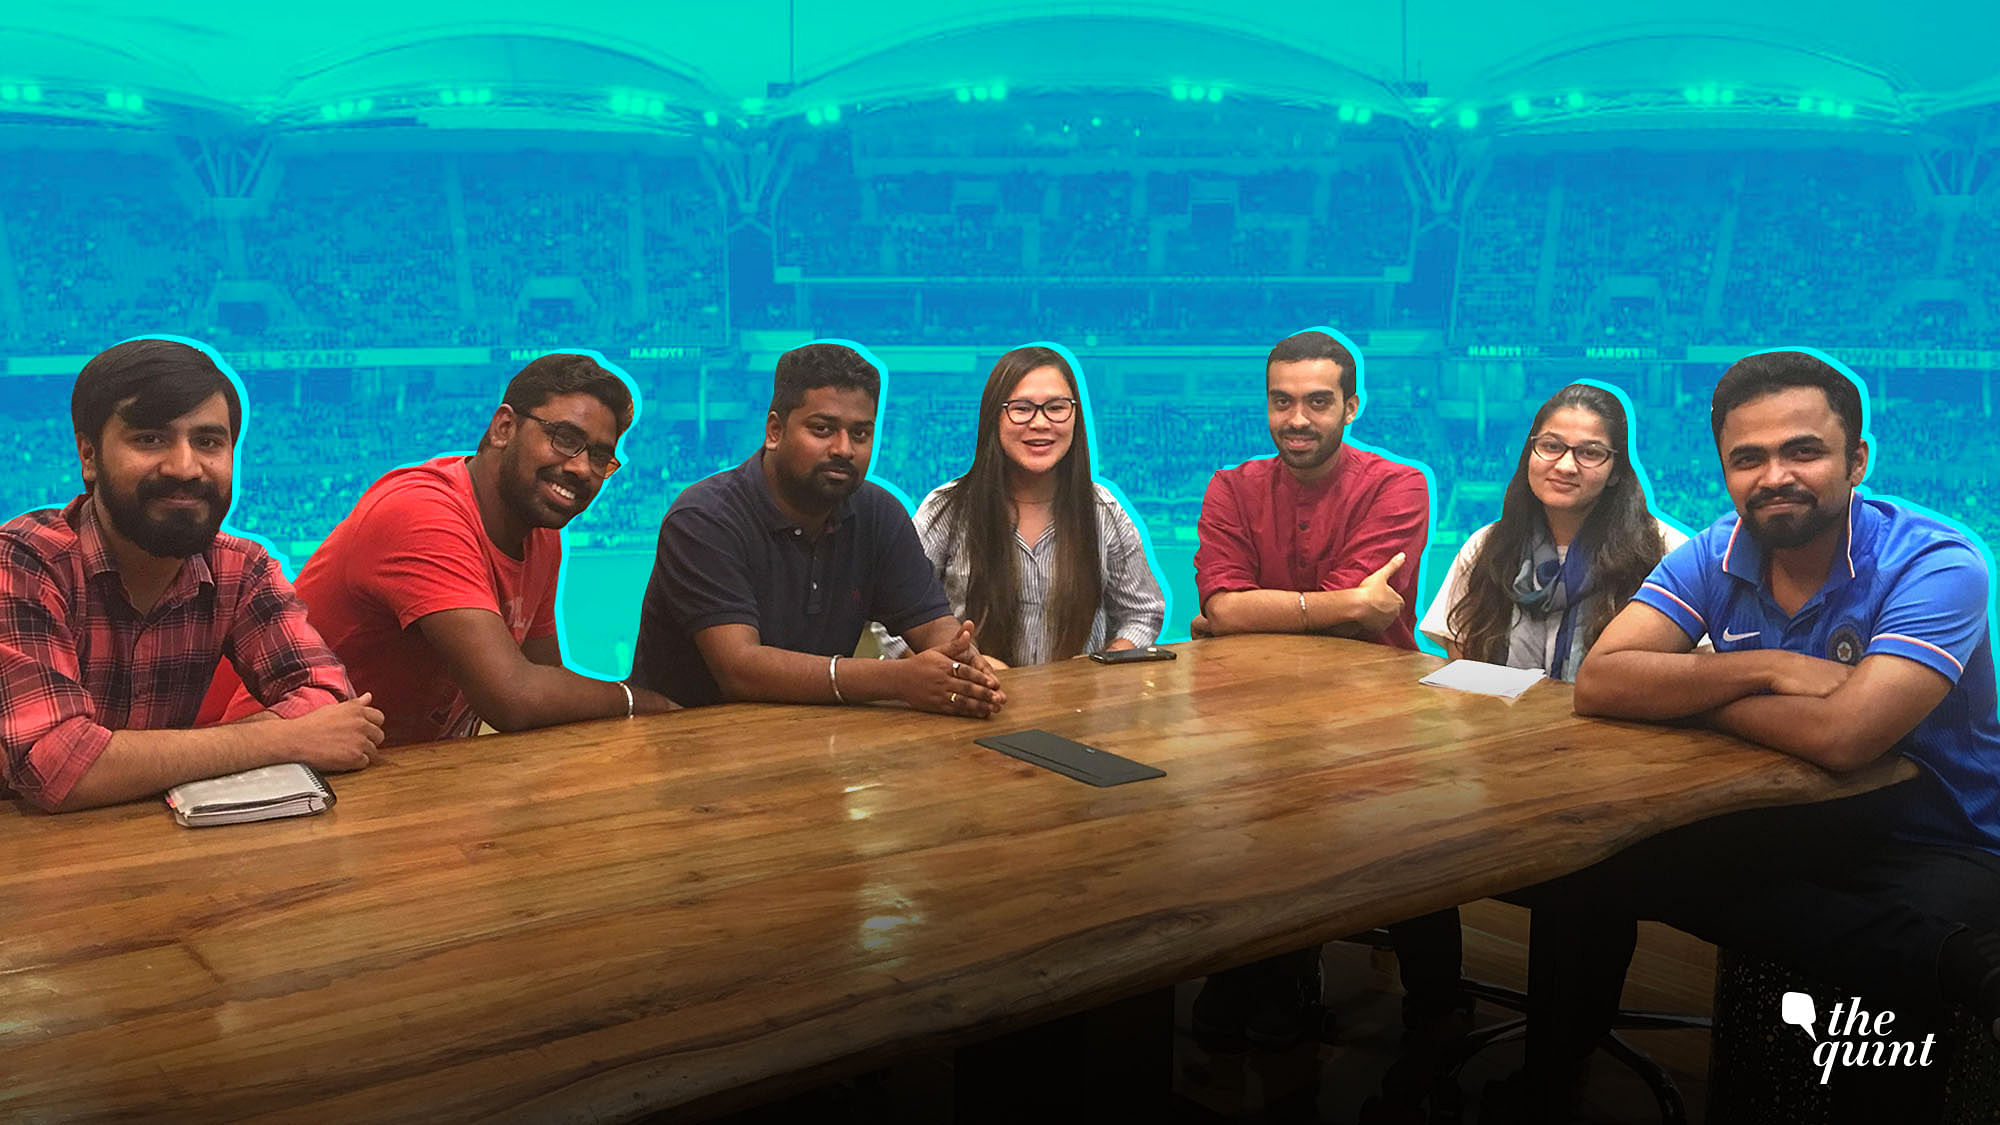 Watch the Quint’s sports team discuss the big moments and players that took the semi-final away from India.